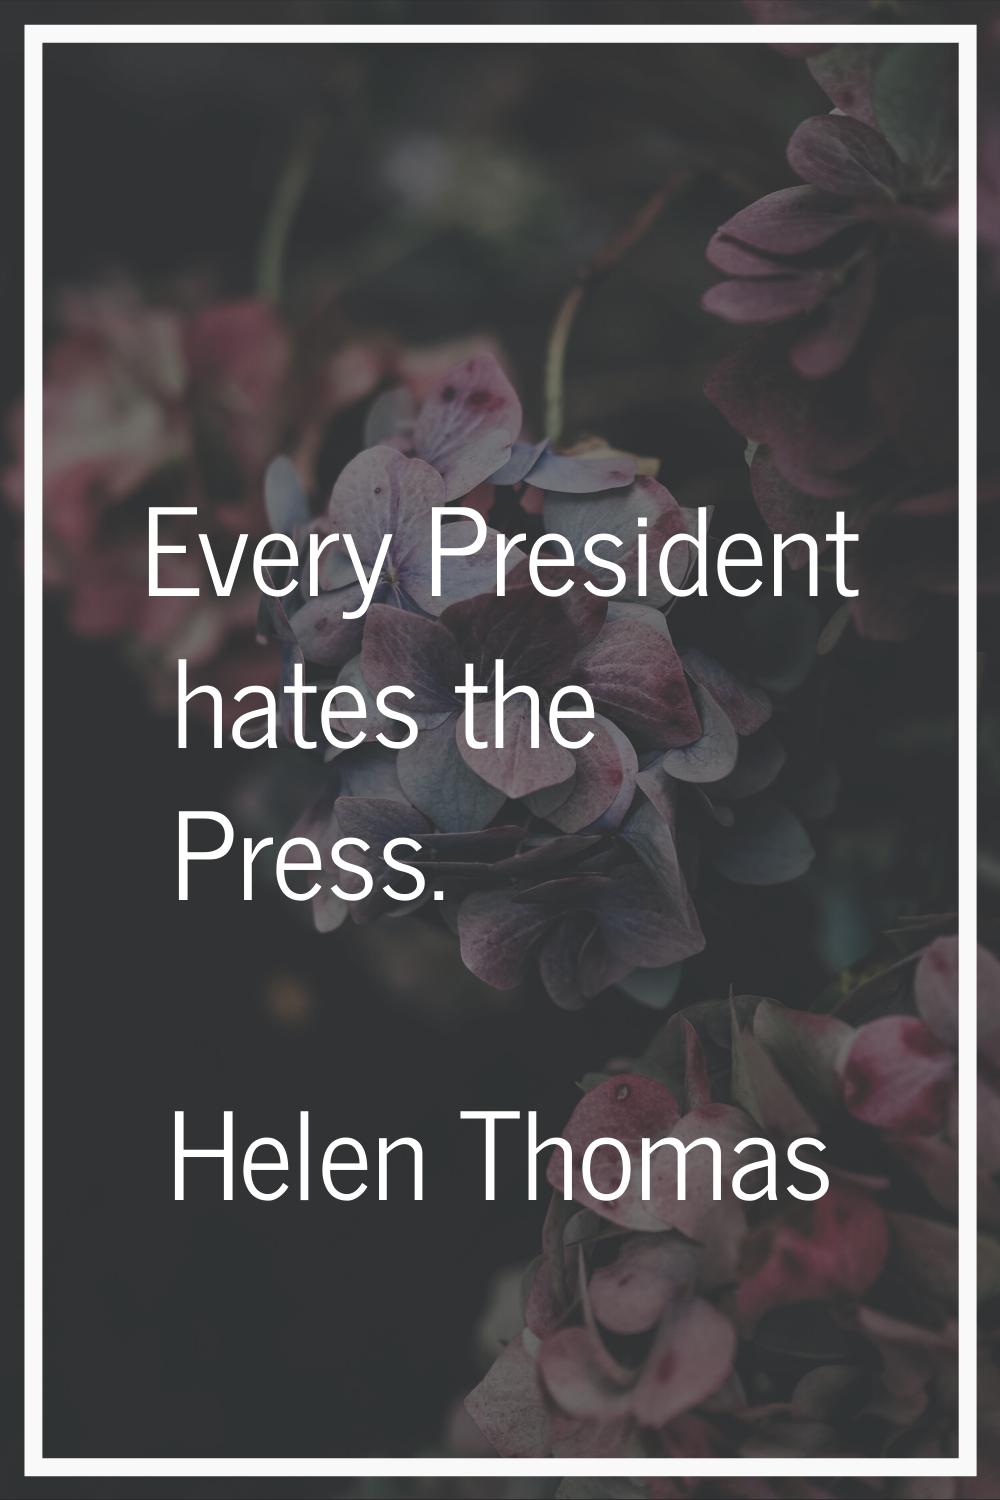 Every President hates the Press.